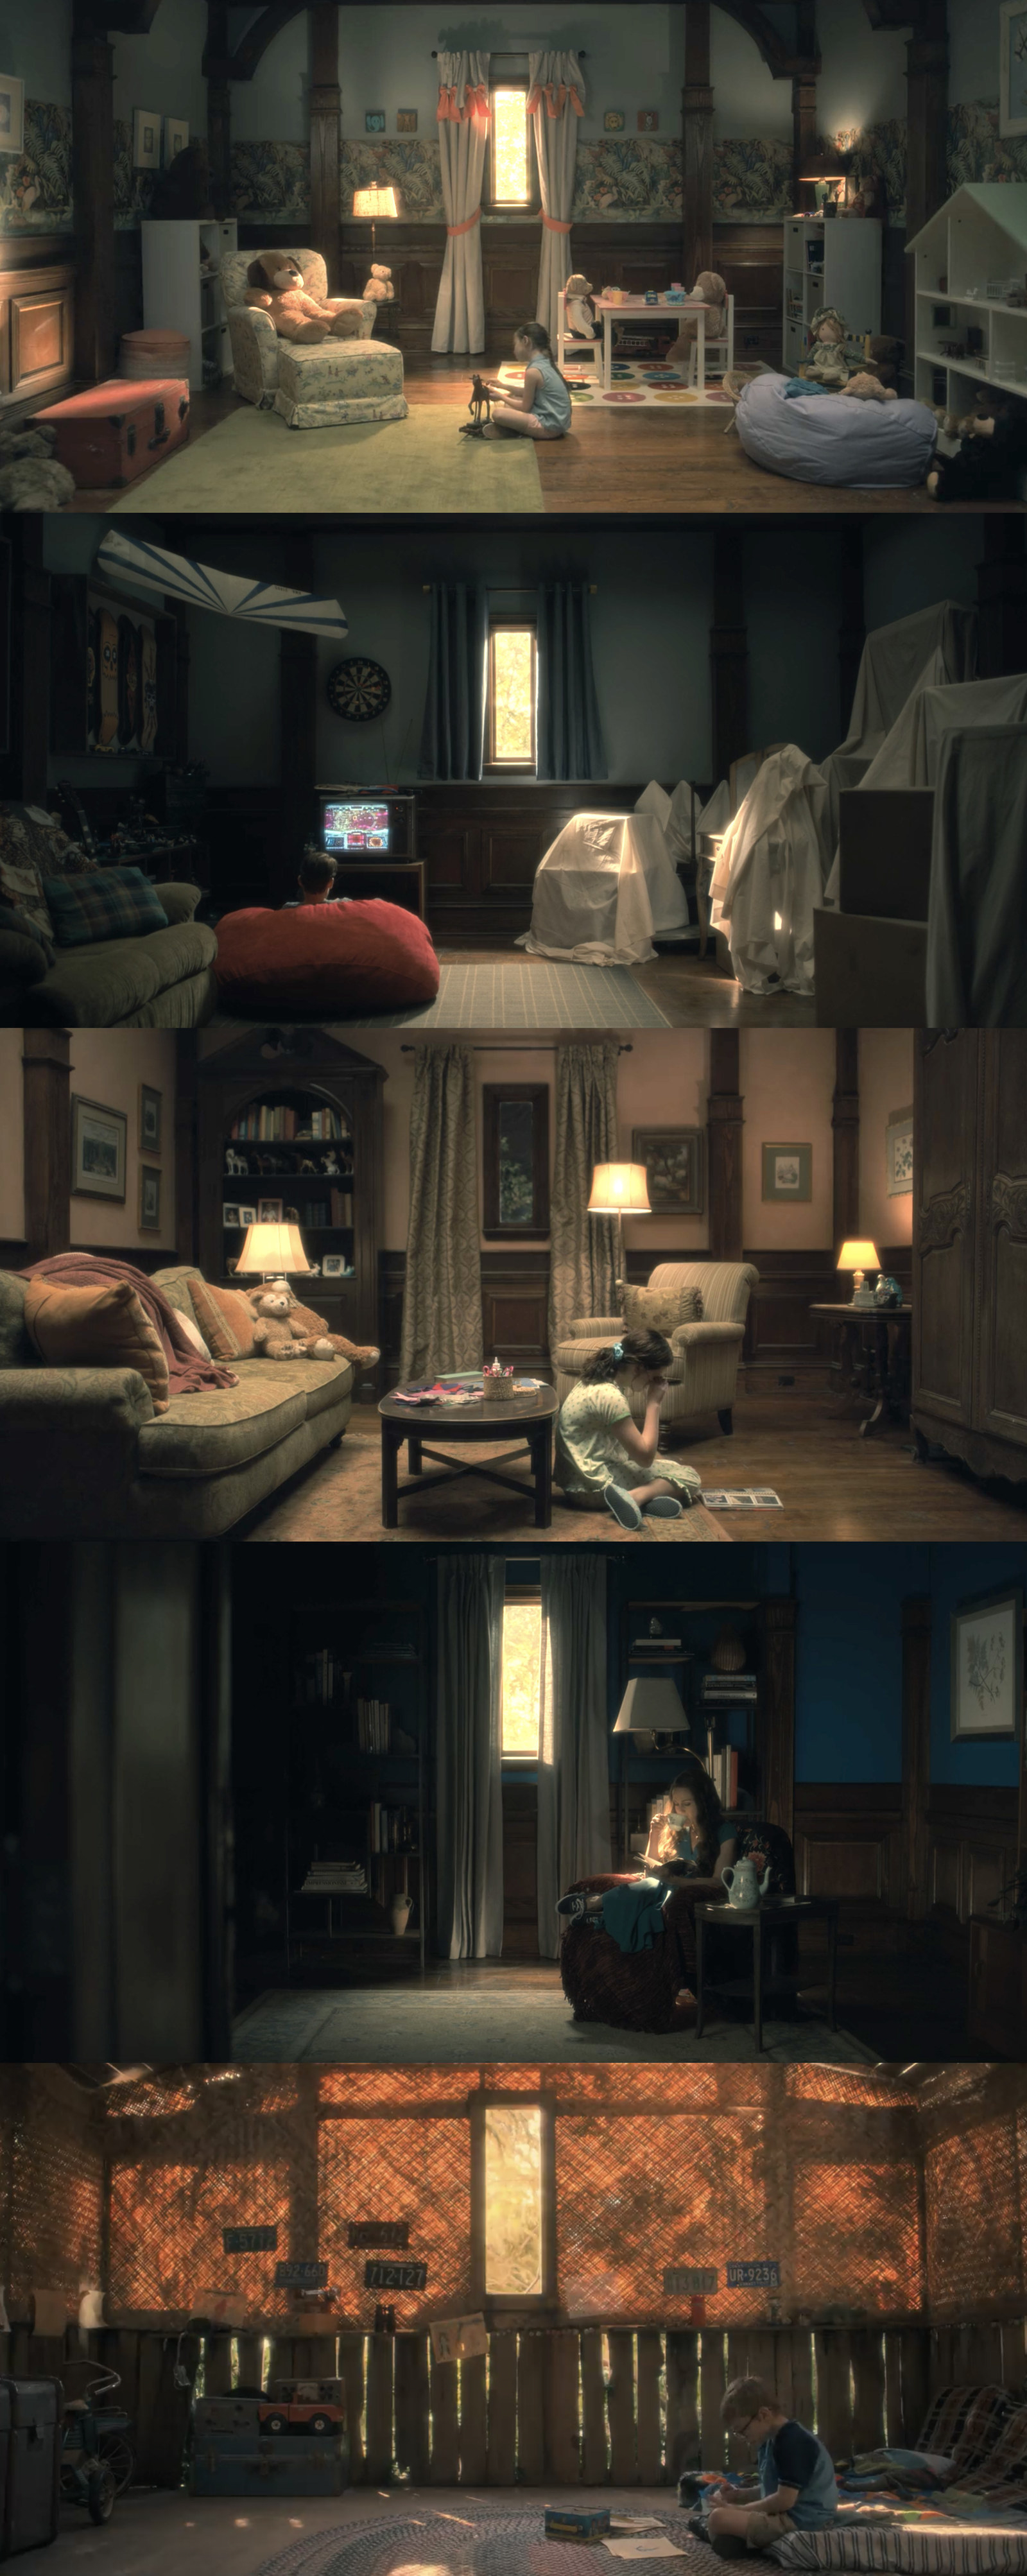 different scenes of the house with dim light and fabric covering the furniture